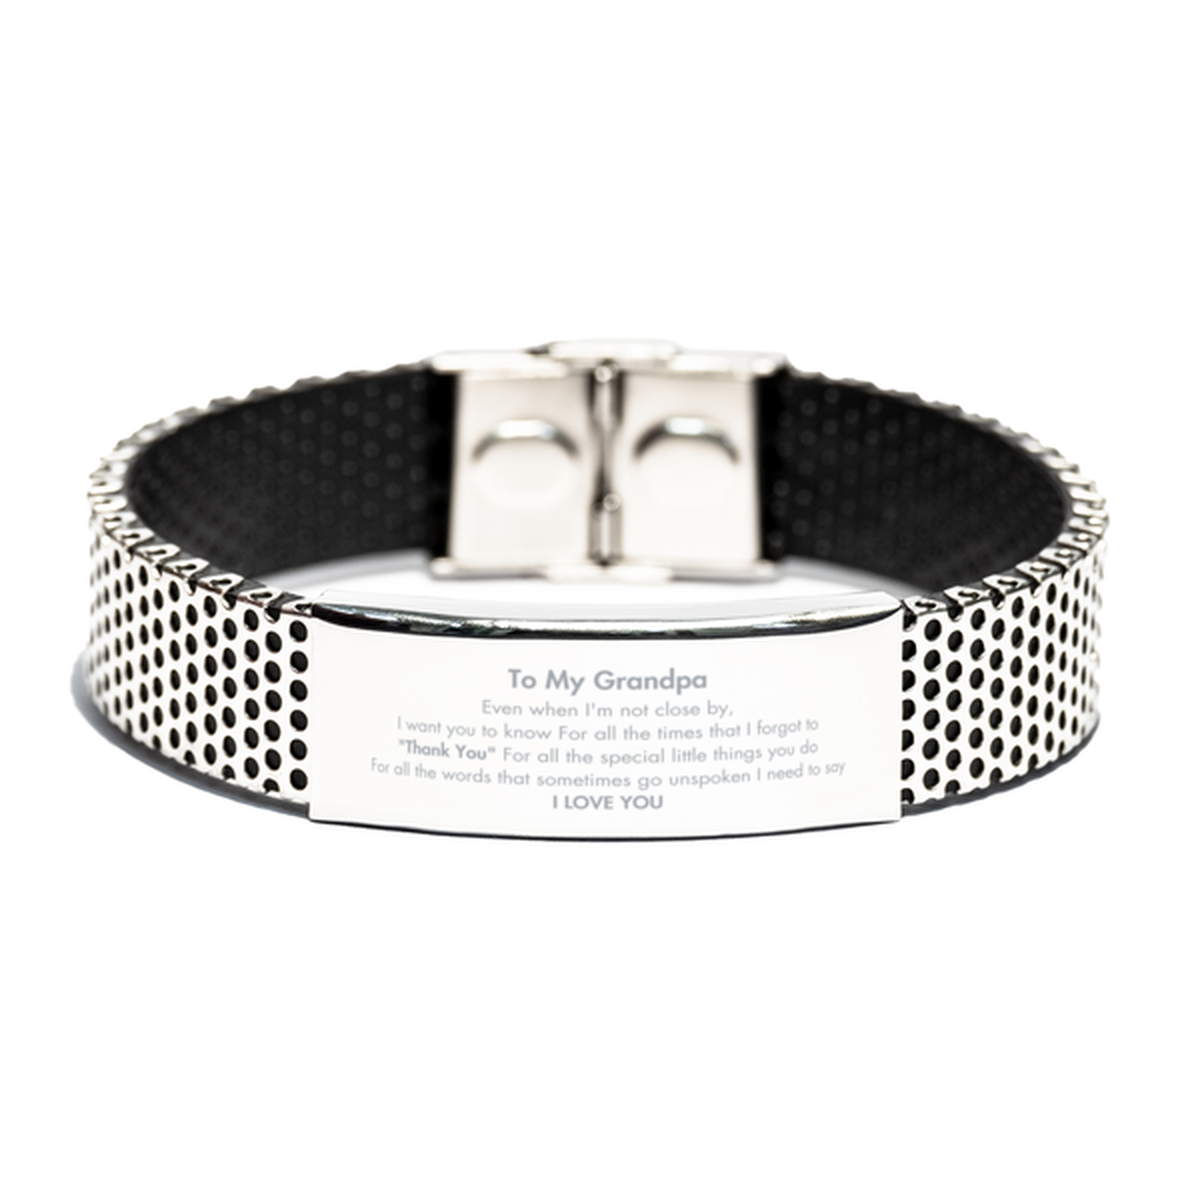 Thank You Gifts for Grandpa, Keepsake Stainless Steel Bracelet Gifts for Grandpa Birthday Mother's day Father's Day Grandpa For all the words That sometimes go unspoken I need to say I LOVE YOU